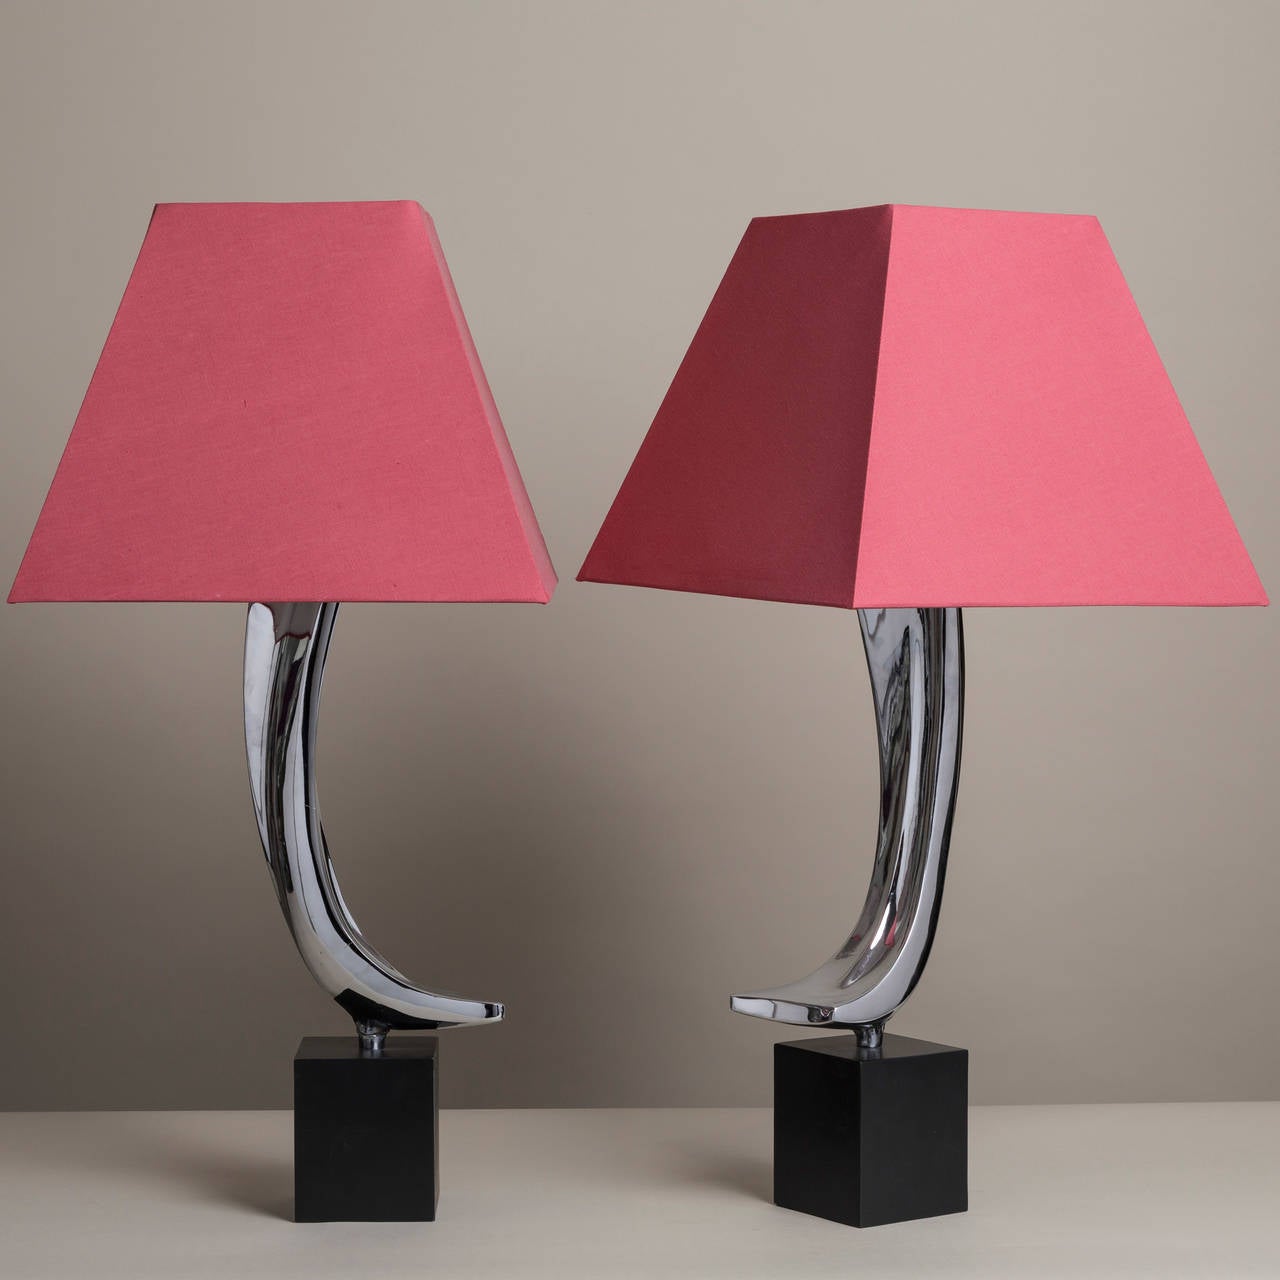 American Pair of Nickel-Plated Table Lamps by Laurel, USA, 1960s For Sale